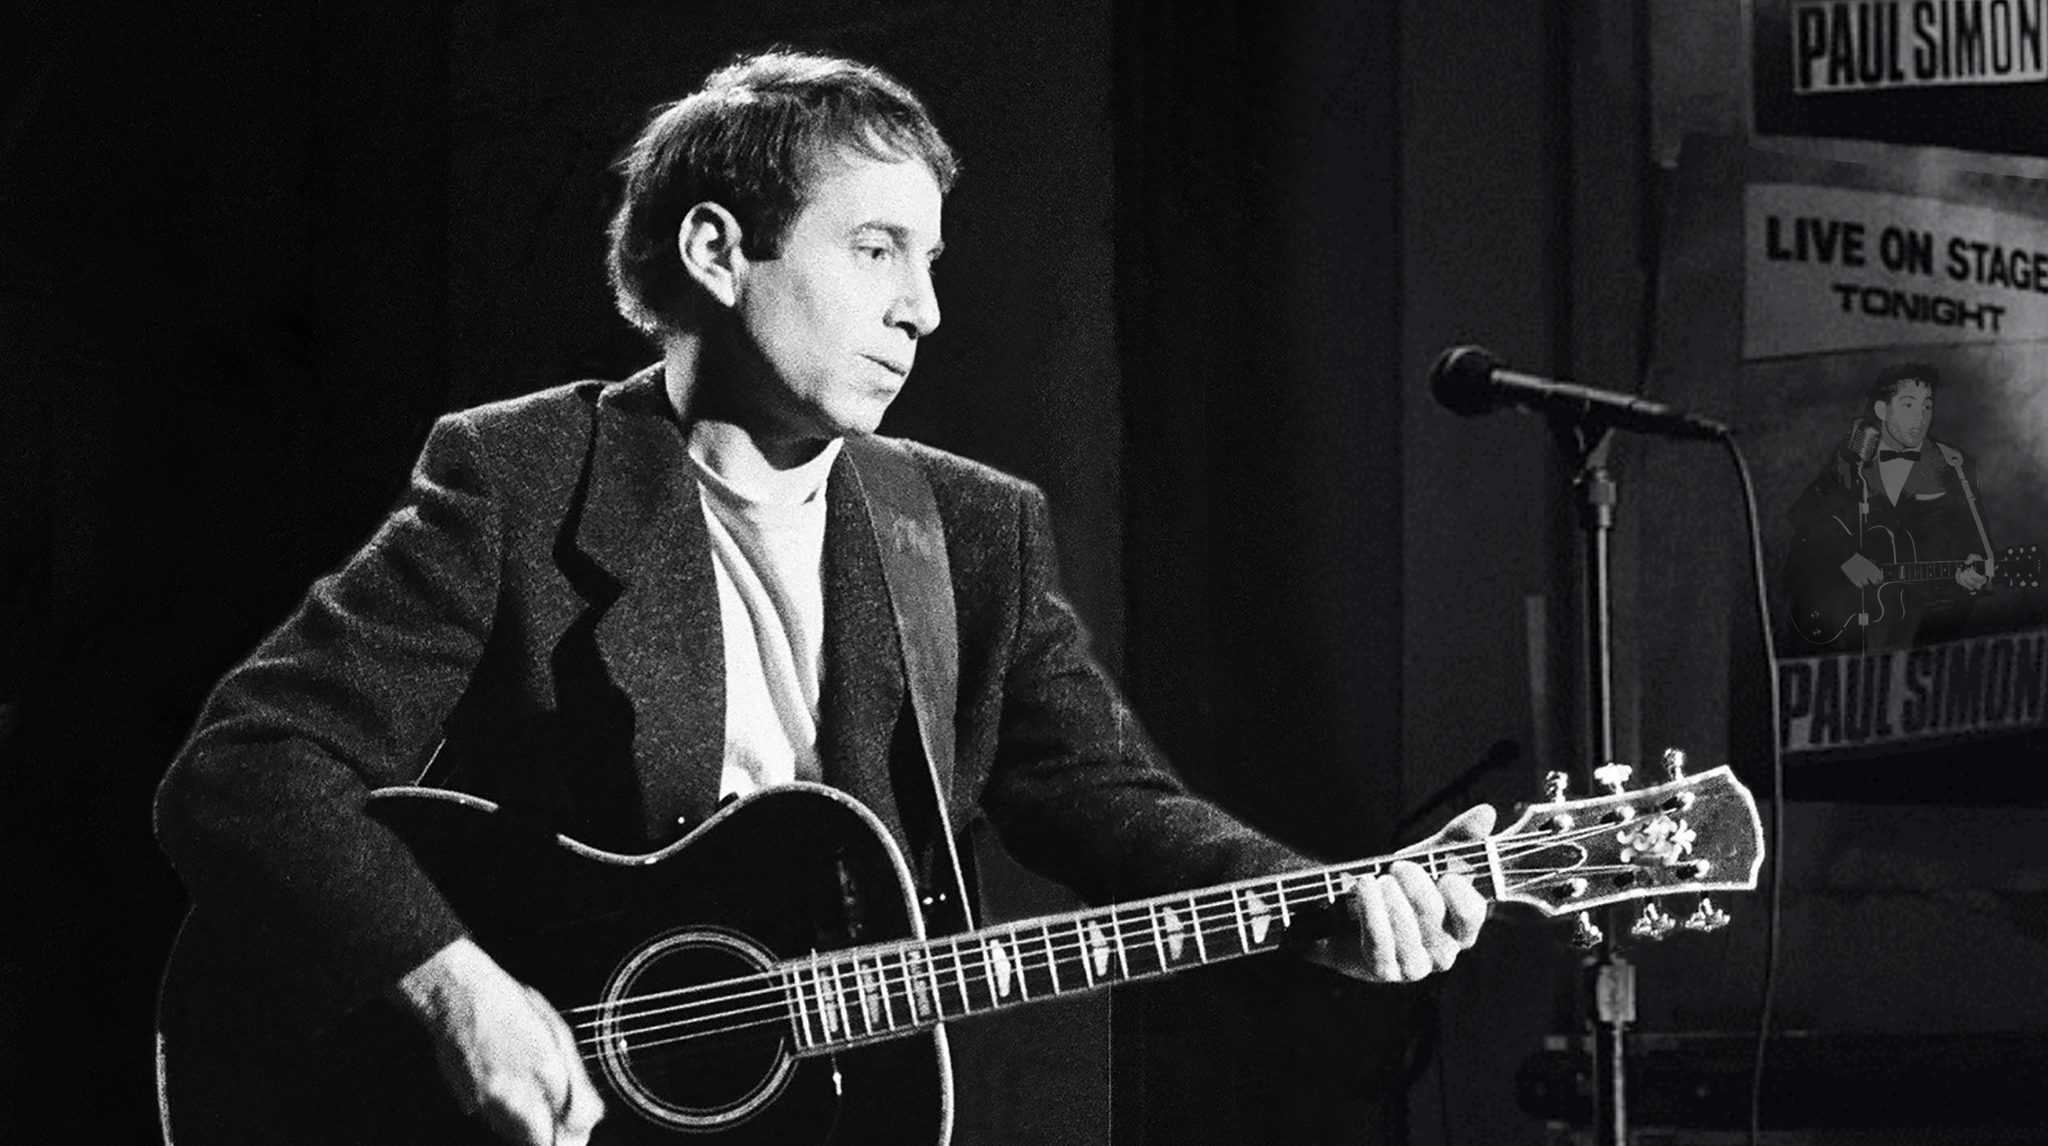 A black and white photo of a young Paul Simon holding a guitar